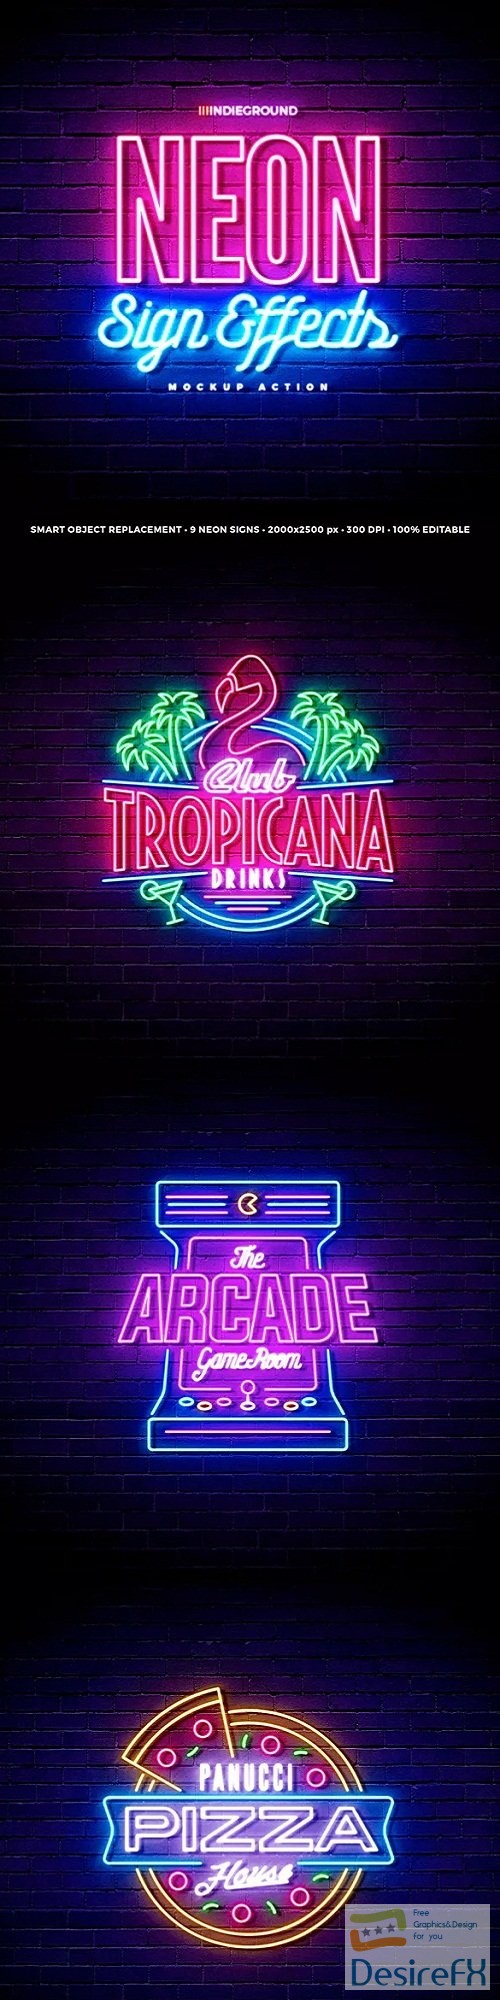 Neon Sign Effects 23320789